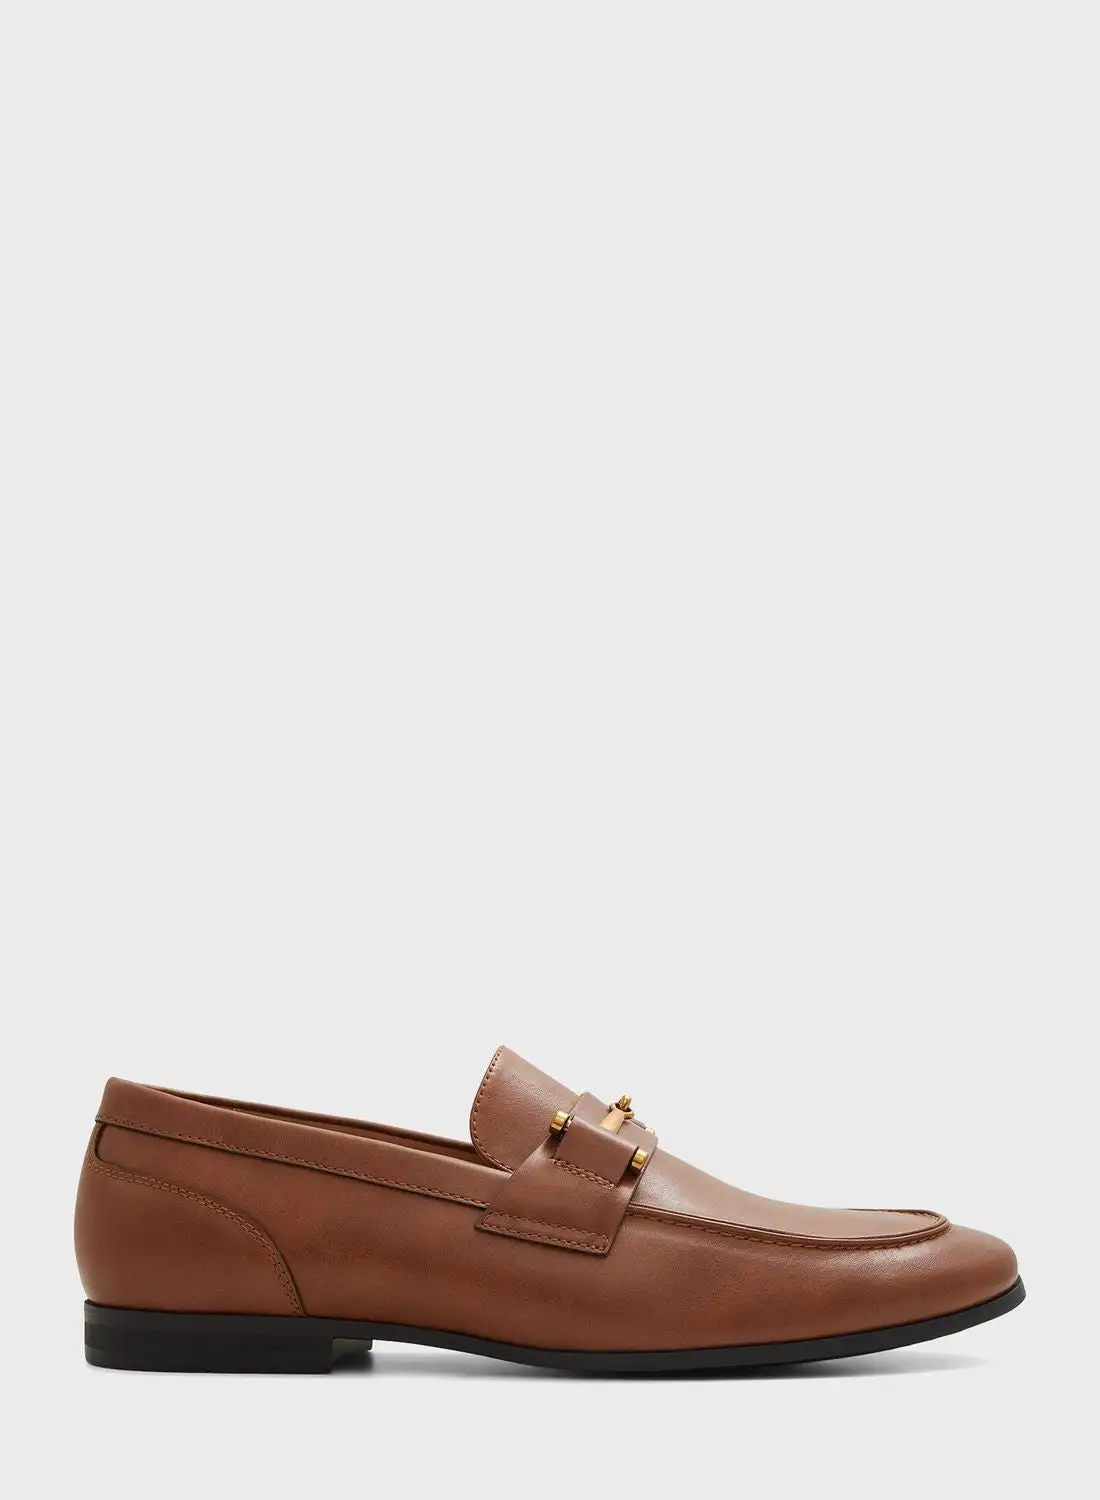 CALL IT SPRING Casual Slip On Loafers